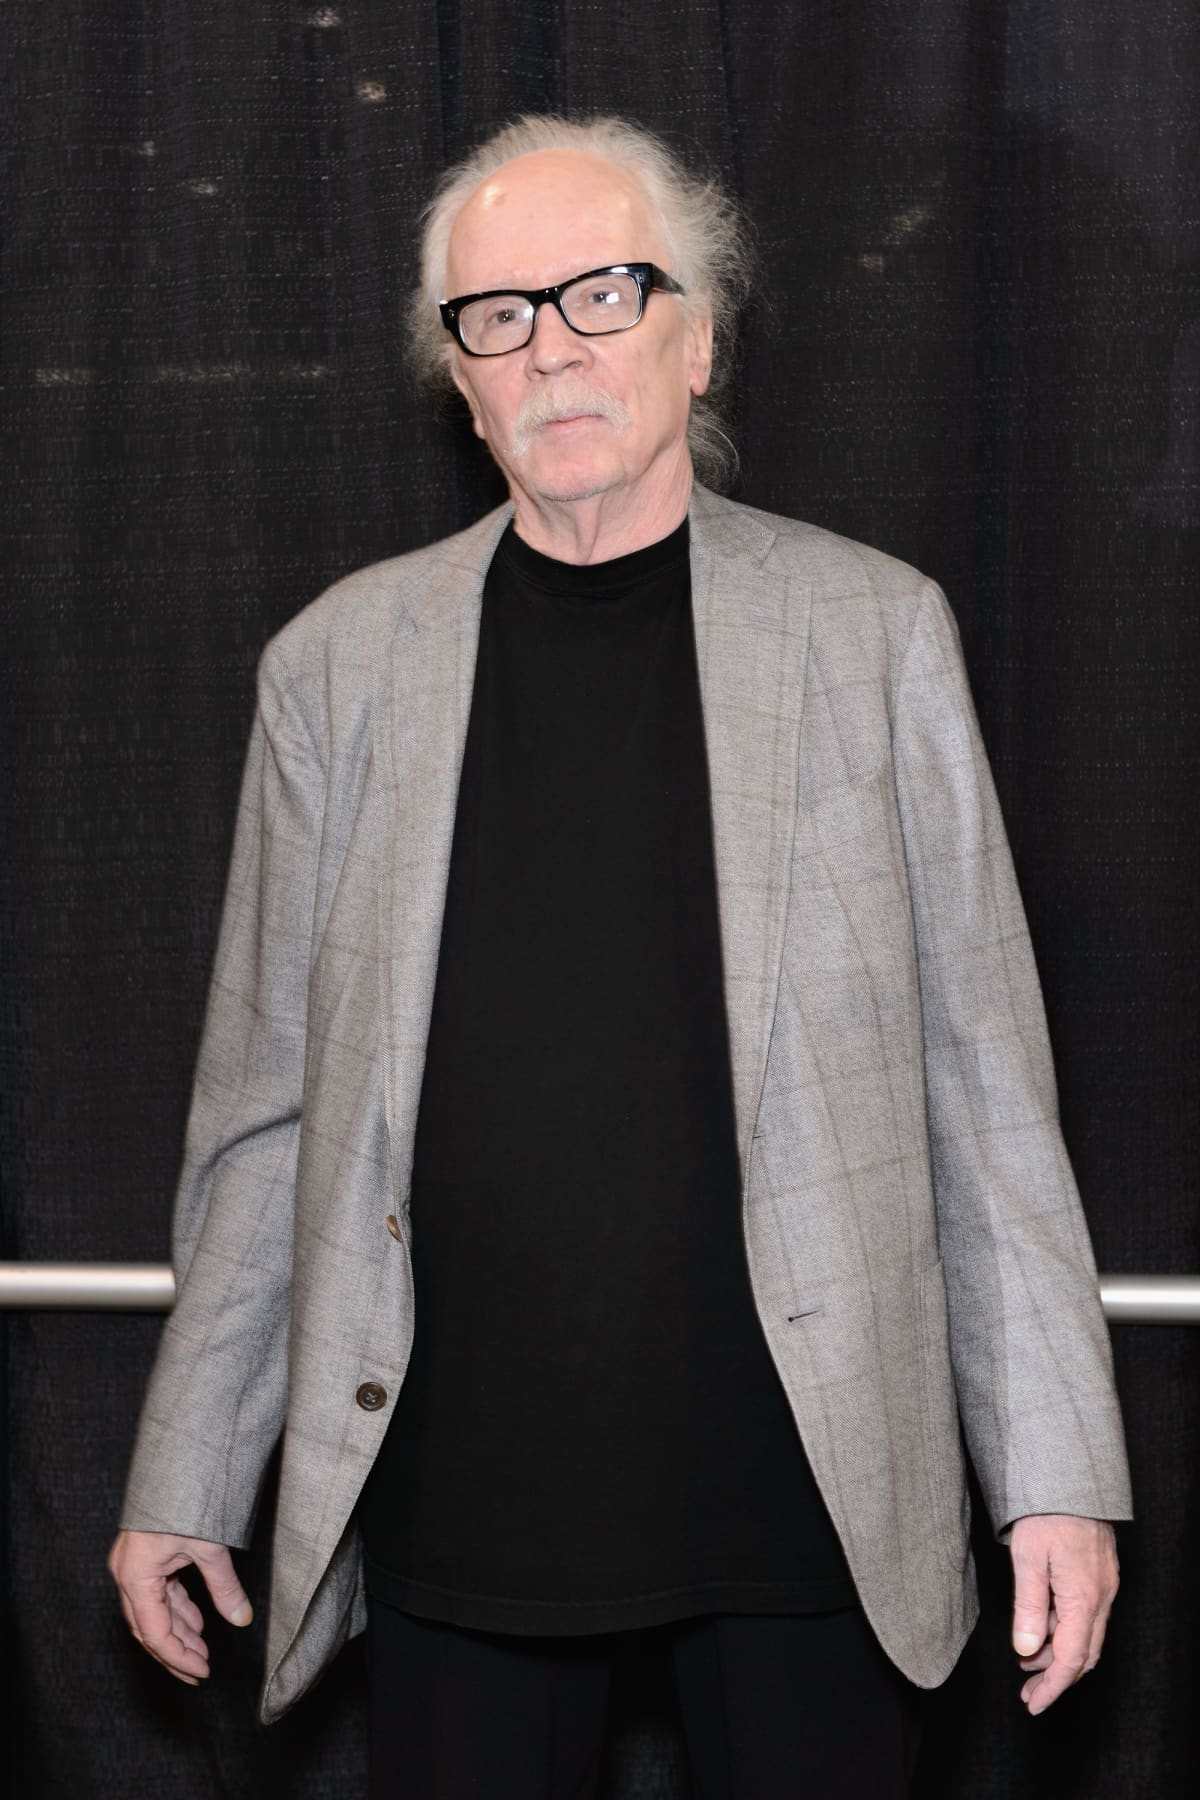 CHICAGO, IL - AUGUST 23:  John Carpenter attends Wizard World Chicago Comic Con 2014 at Donald E. Stephens Convention Center on August 23, 2014 in Chicago, Illinois.  (Photo by Gabriel Grams/FilmMagic)